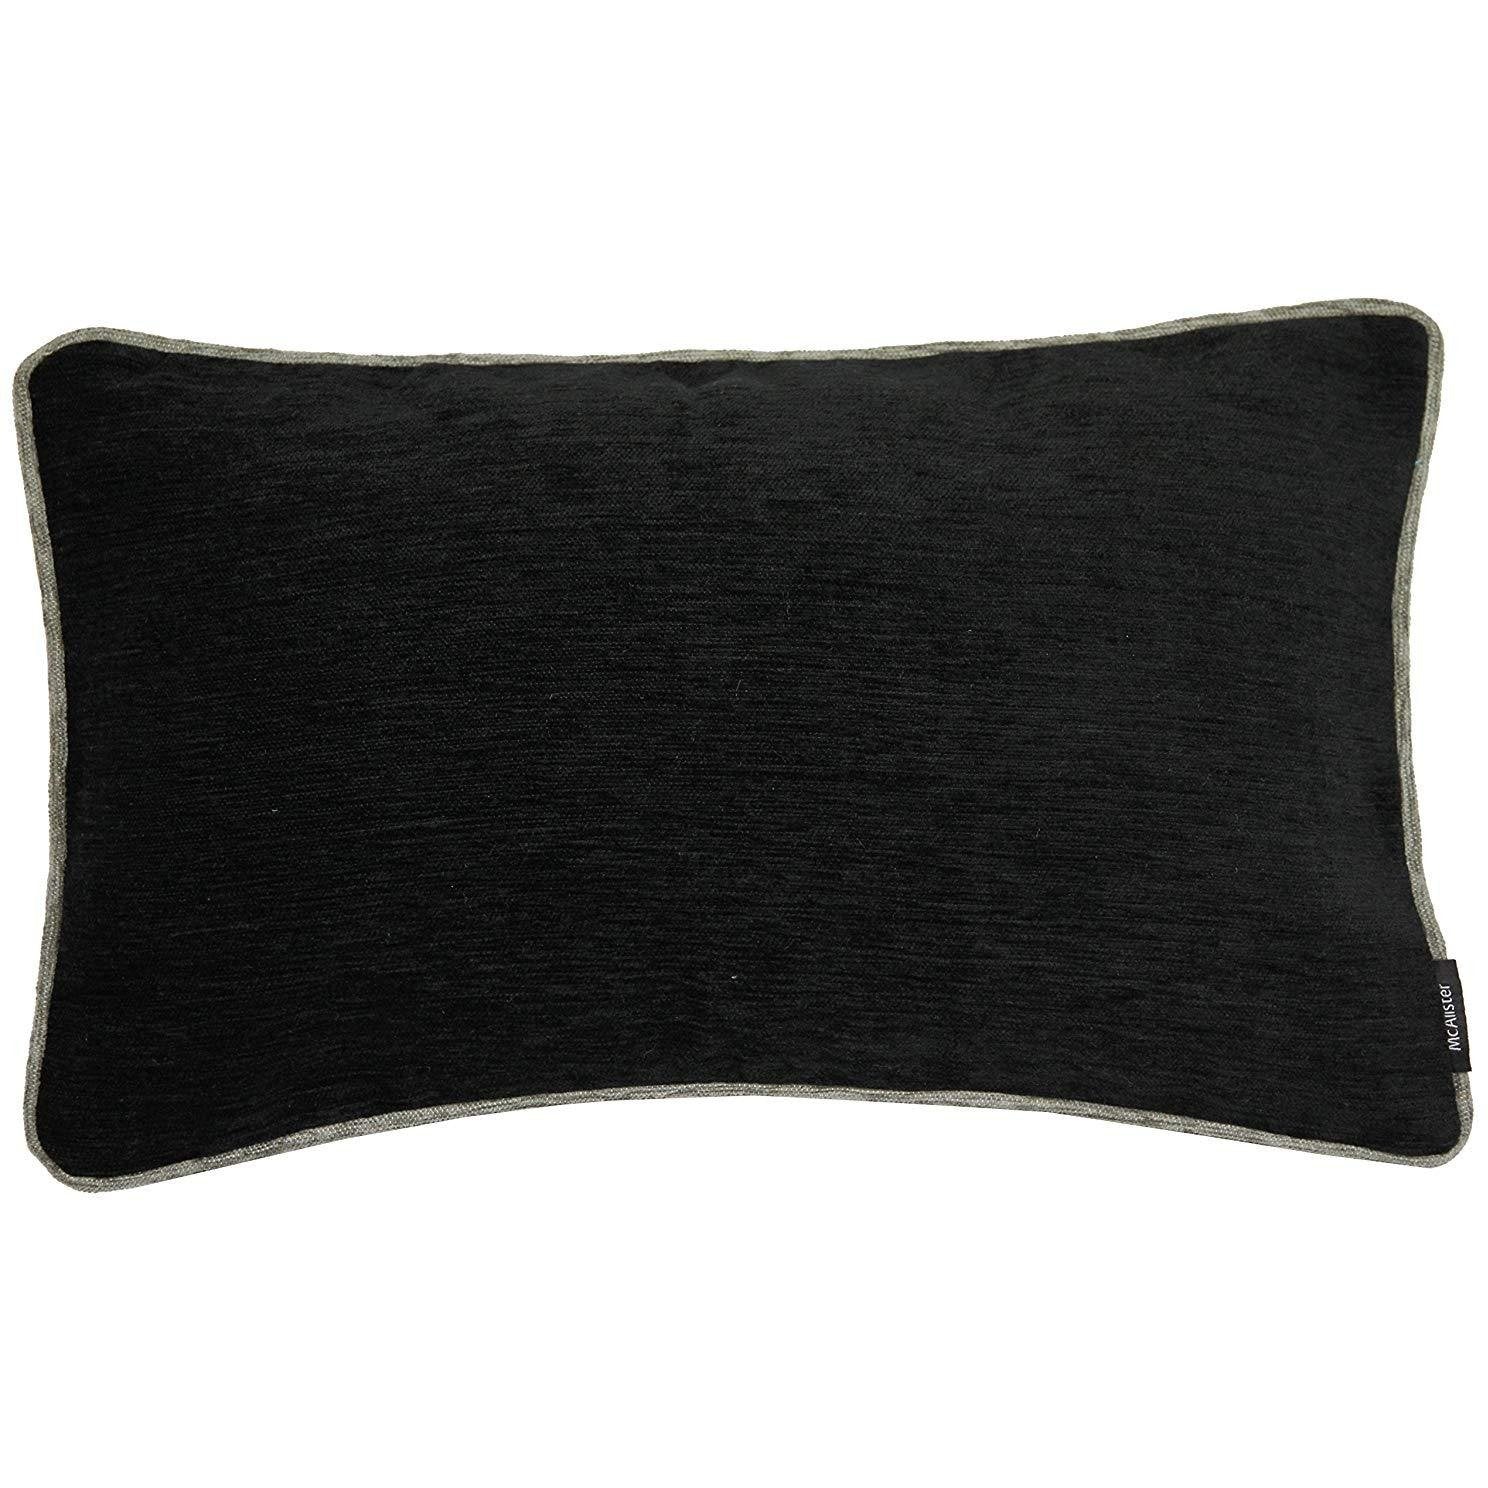 McAlister Textiles Alston Chenille Black + Grey Cushion Cushions and Covers Cover Only 50cm x 30cm 